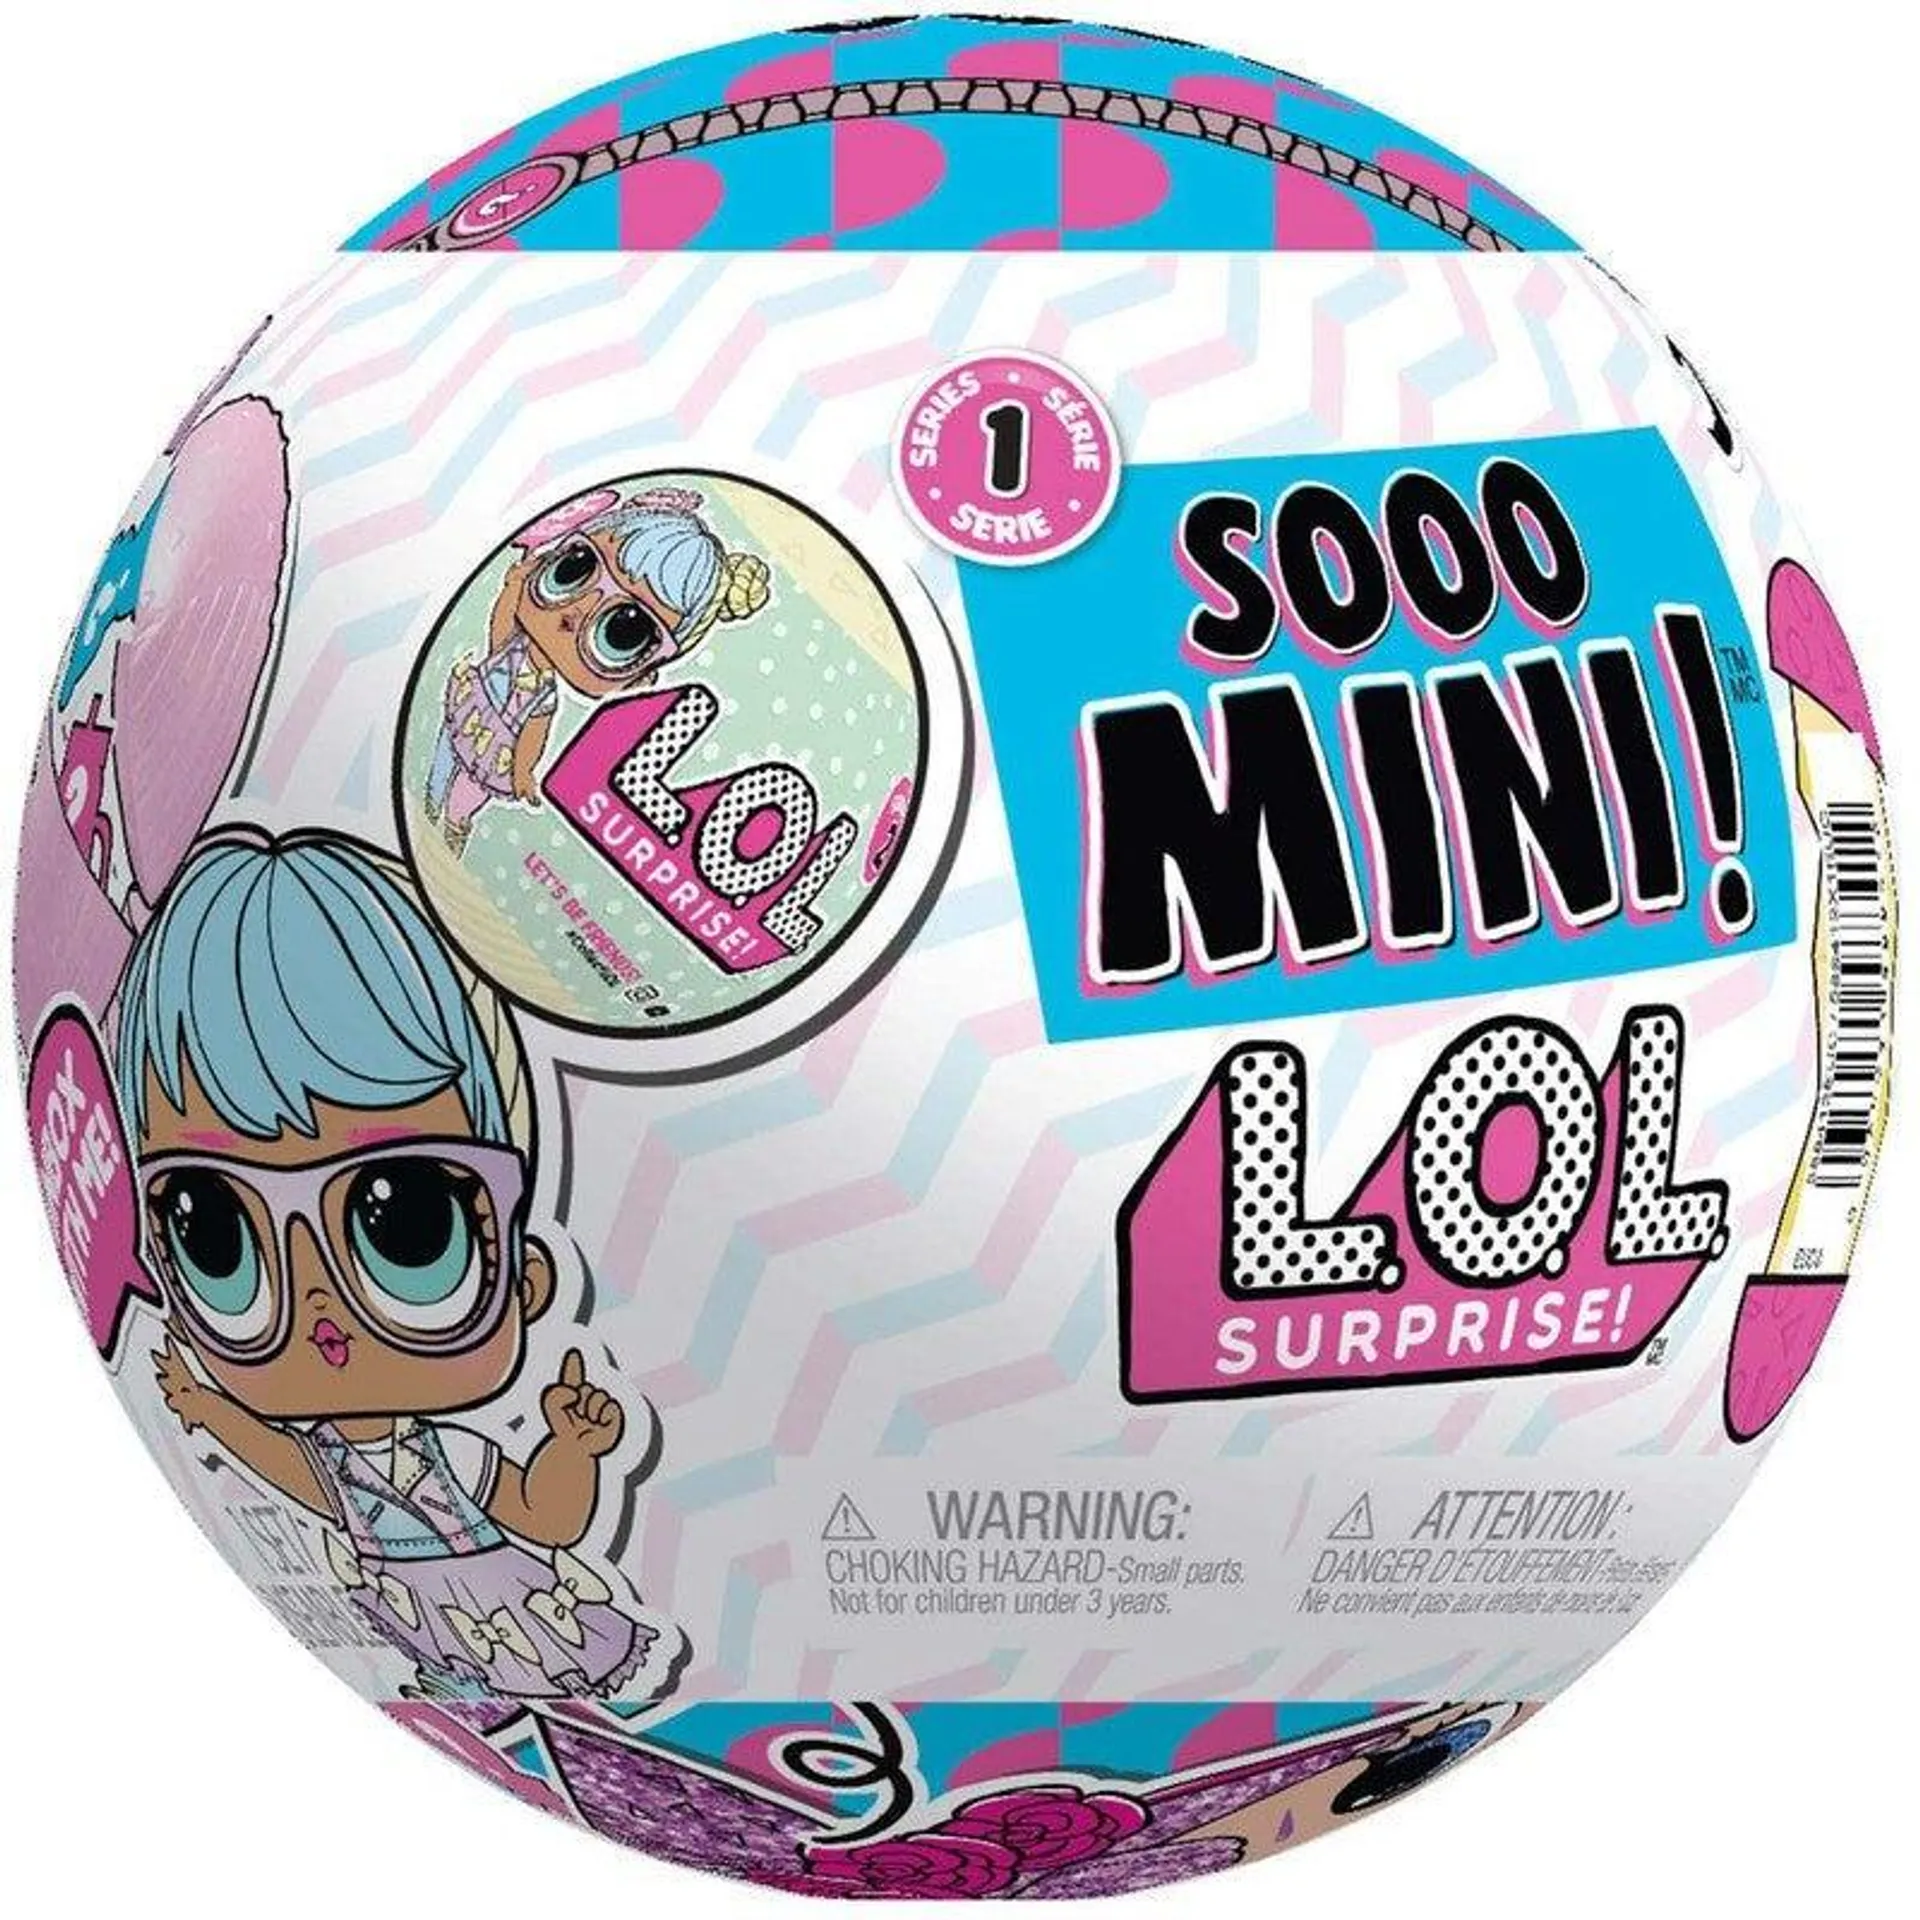 LOL SURPRISE! SOOO MINI! SERIES 1 COLLECTIBLE DOLL BLIND BALL